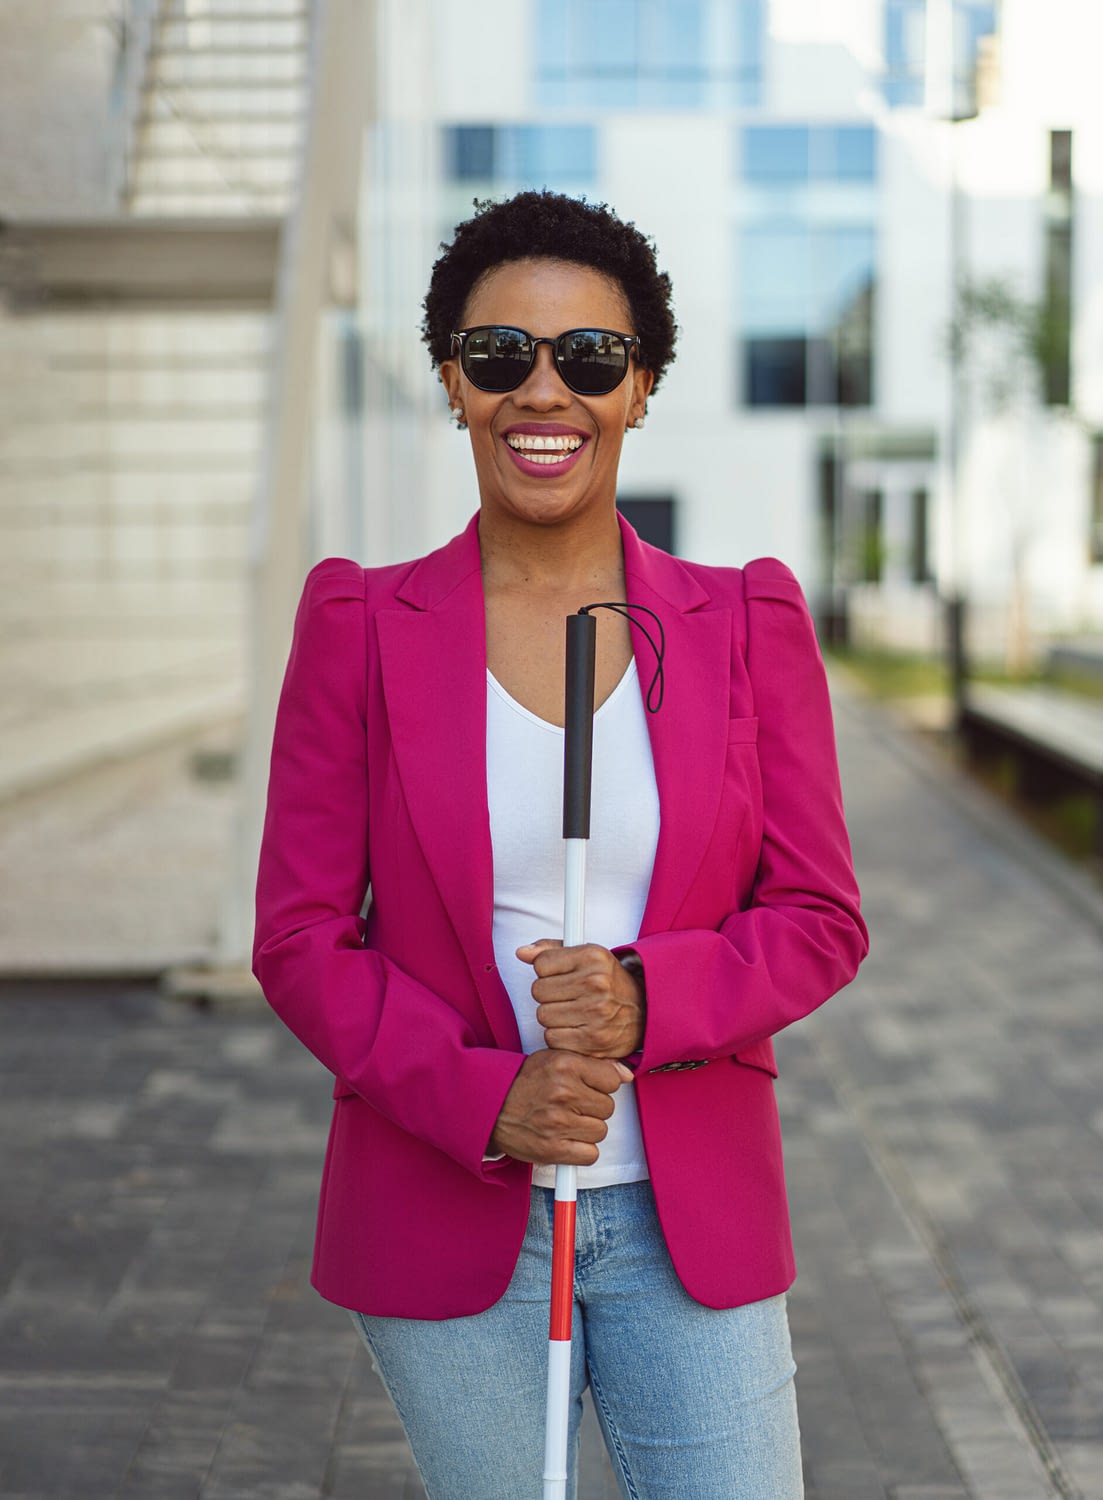 Decorative: A mixed race woman wearing sunglasses and using a white cane. She is smiling and wearing a pink blazer.